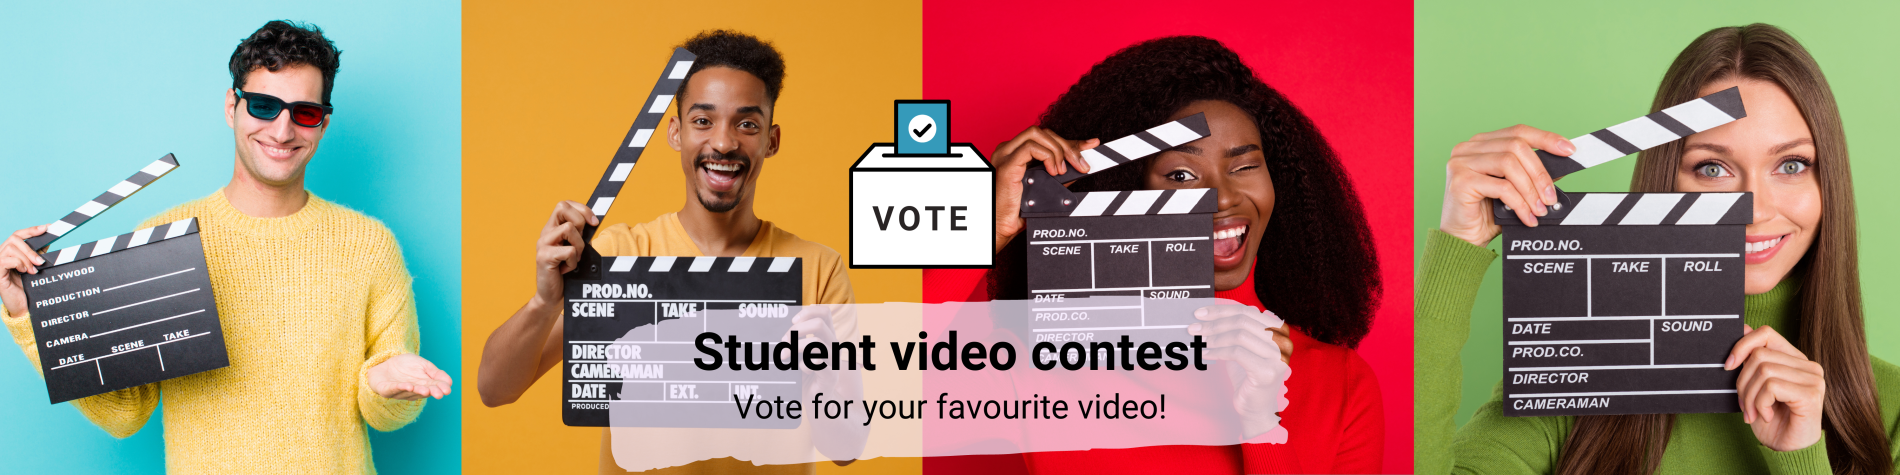 vote_for_your_favourite_video.png